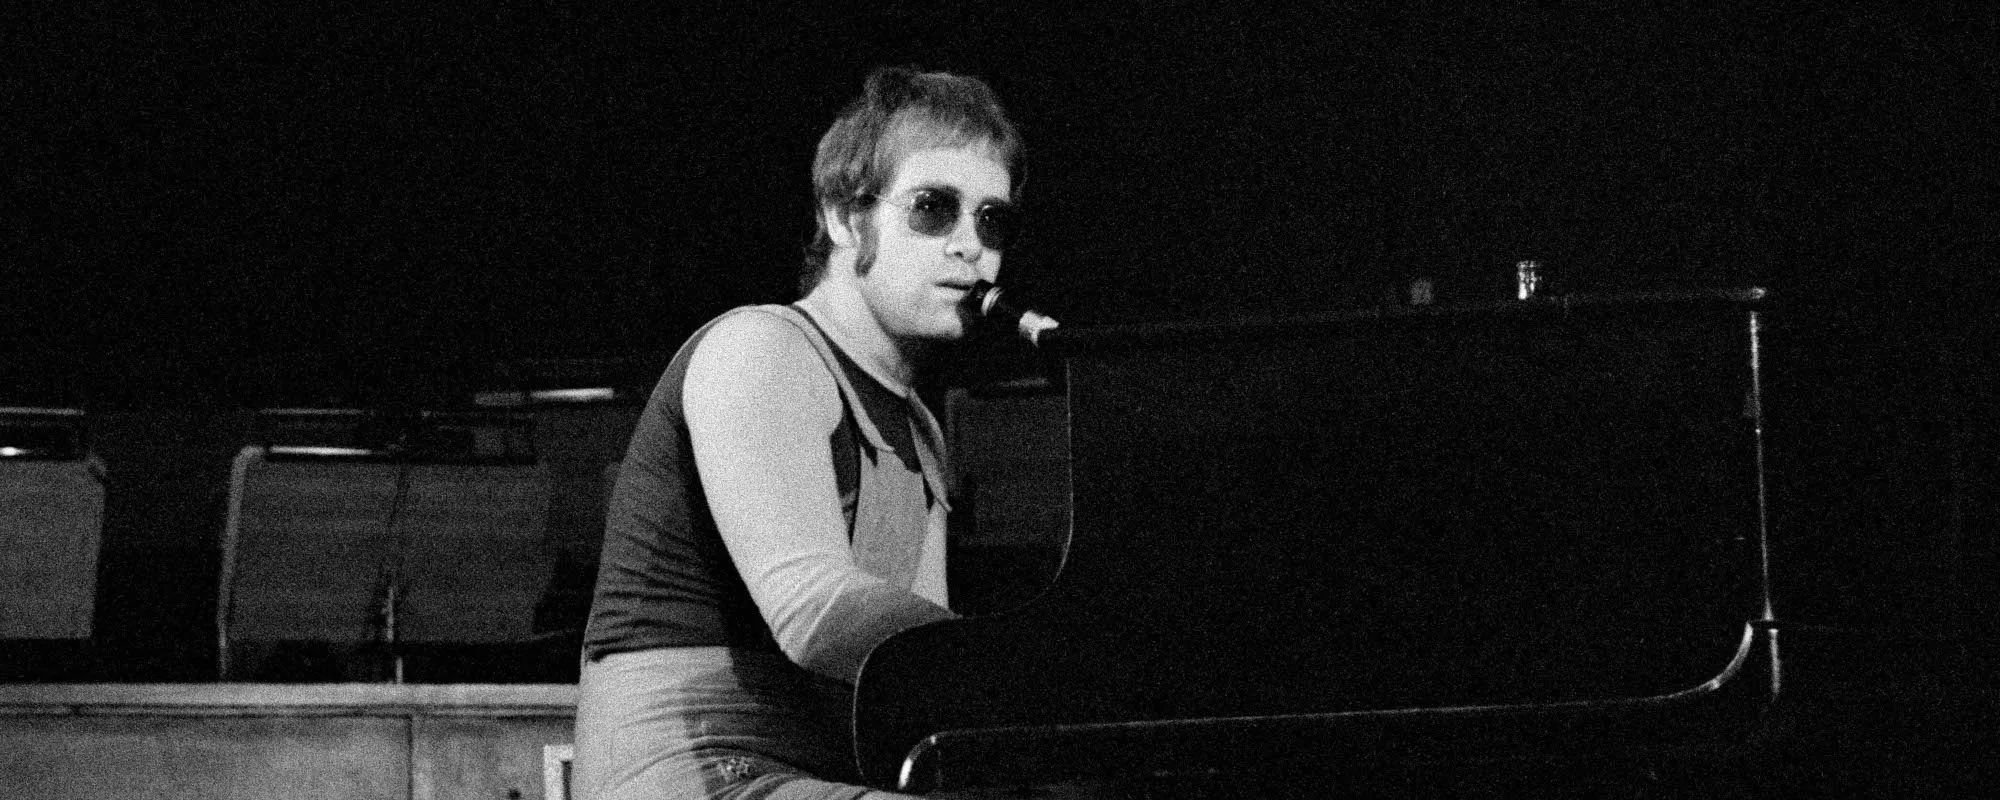 5 Memorable Cover Tunes Elton John Recorded During His 1970s Heyday